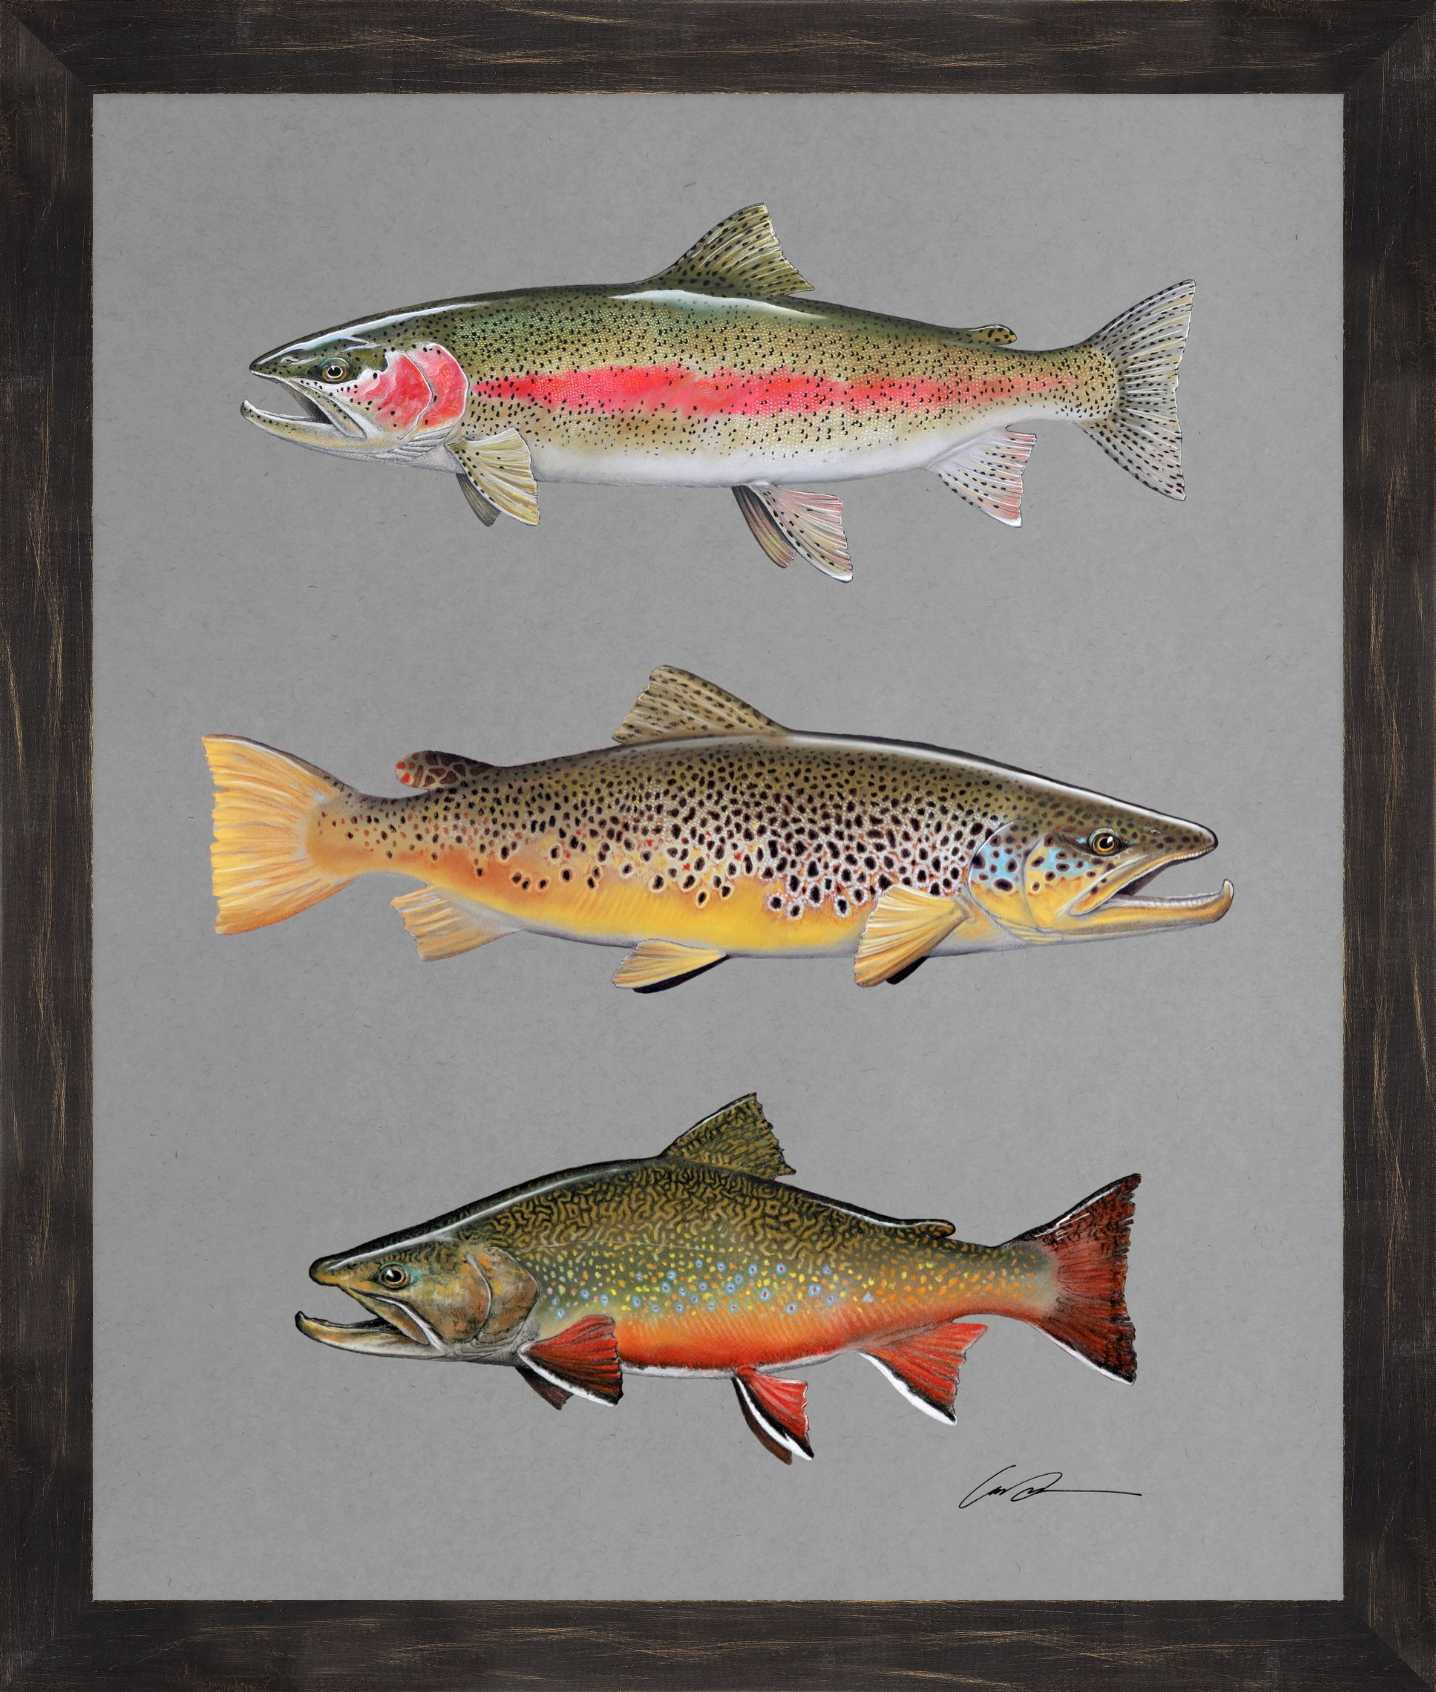 Pastel of a Rainbow Trout at the top, a Brown Trout in the middle, and a Brook Trout at the bottom, framed in a black rustic frame